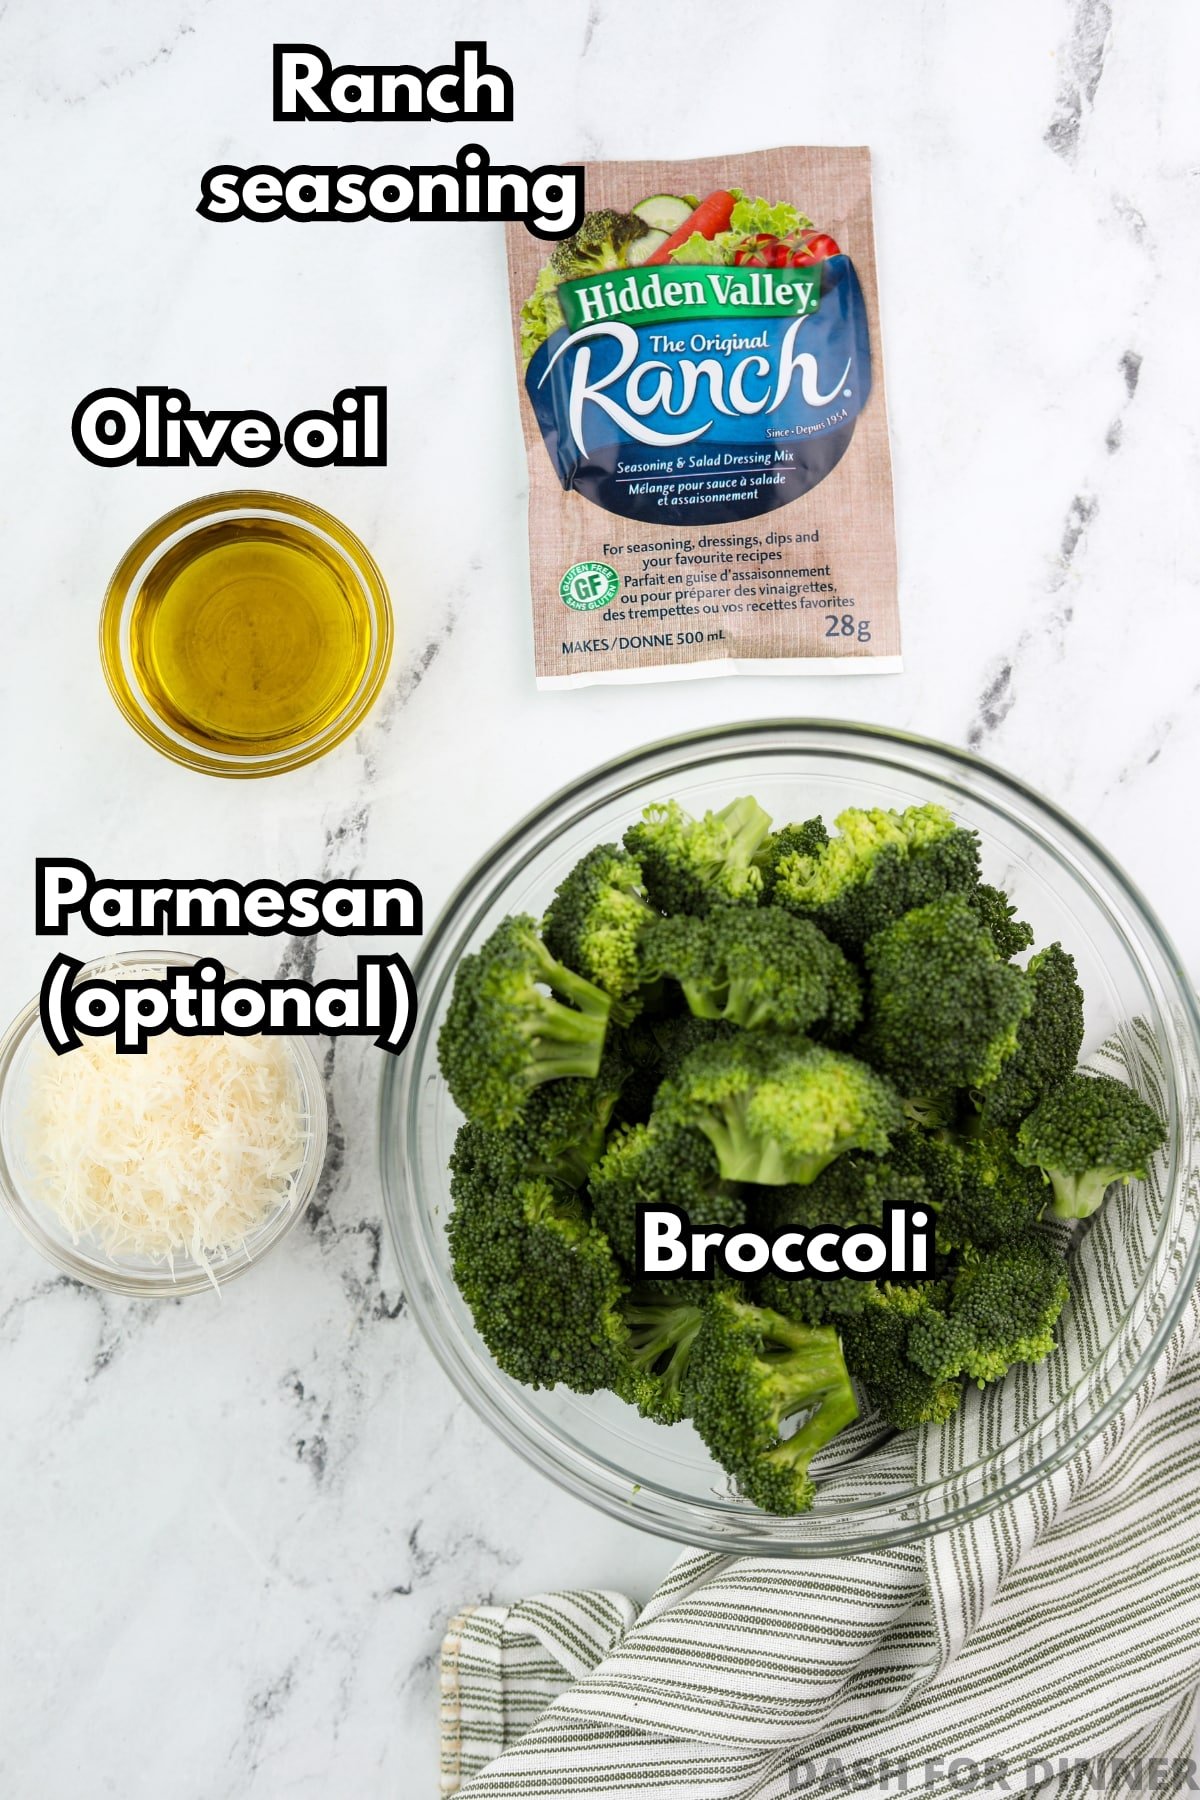 The ingredients needed to make ranch broccoli: broccoli, olive oil, ranch seasoning, and parmesan cheese.